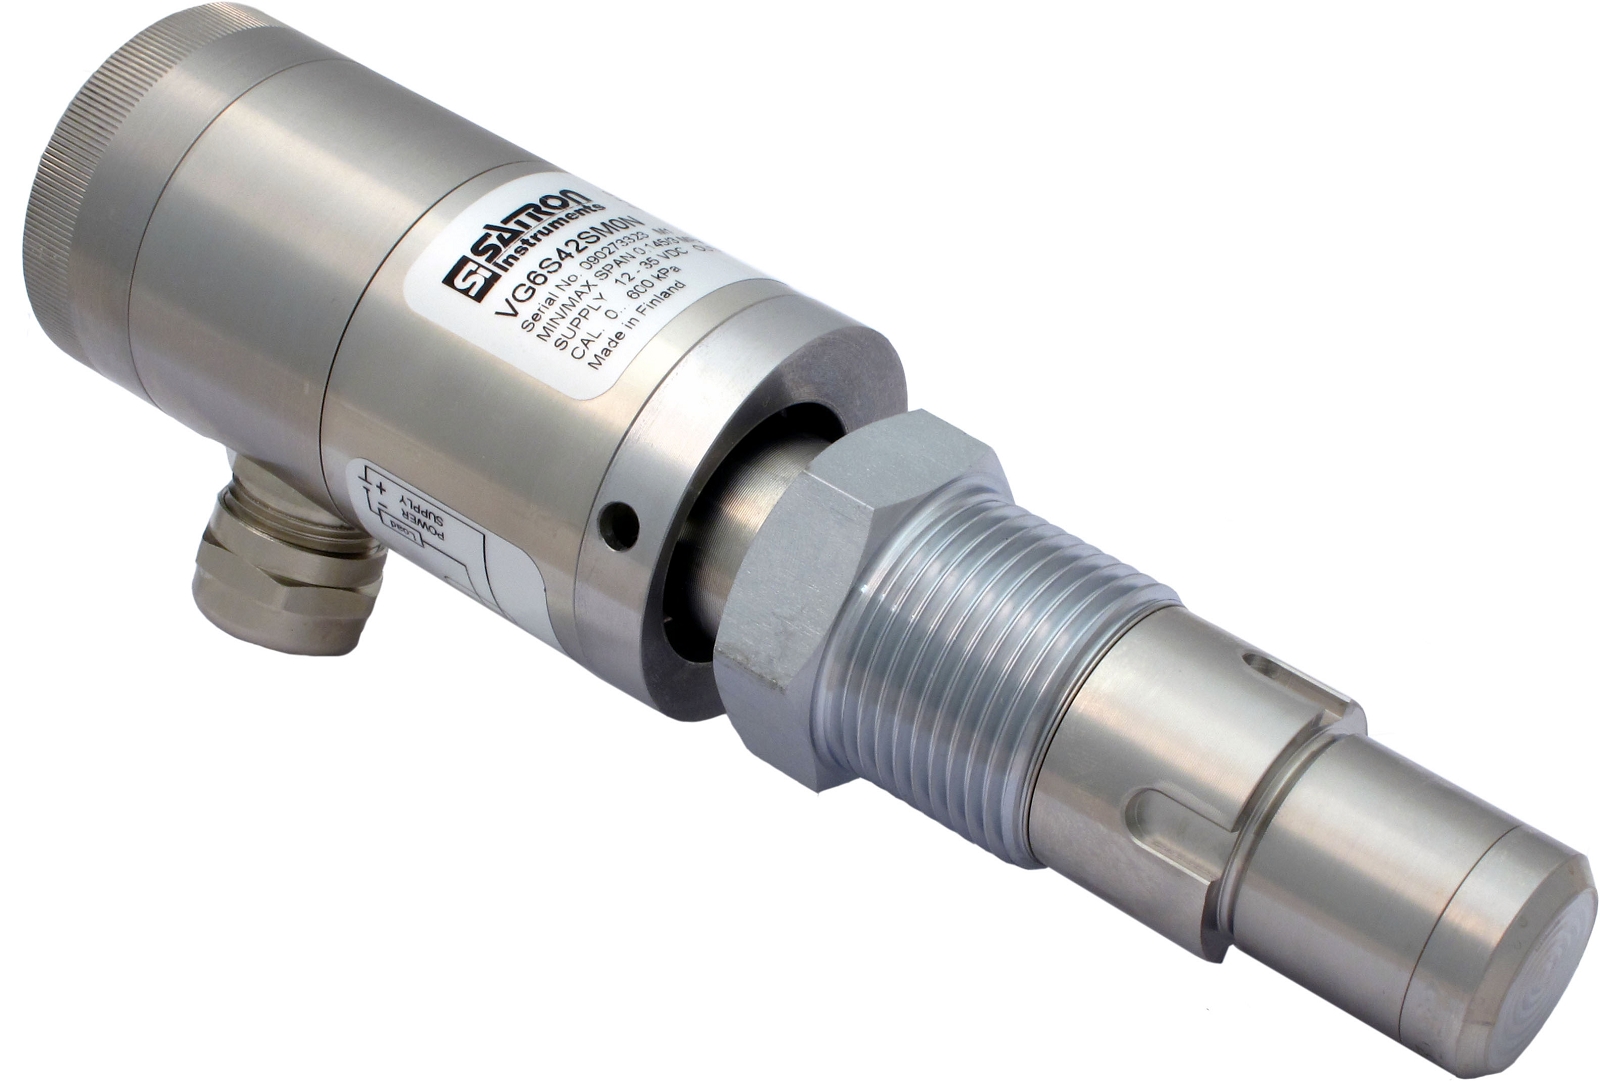 The VG pressure transmitter is available throughout Austria from Industrie Automation Graz, IAG.